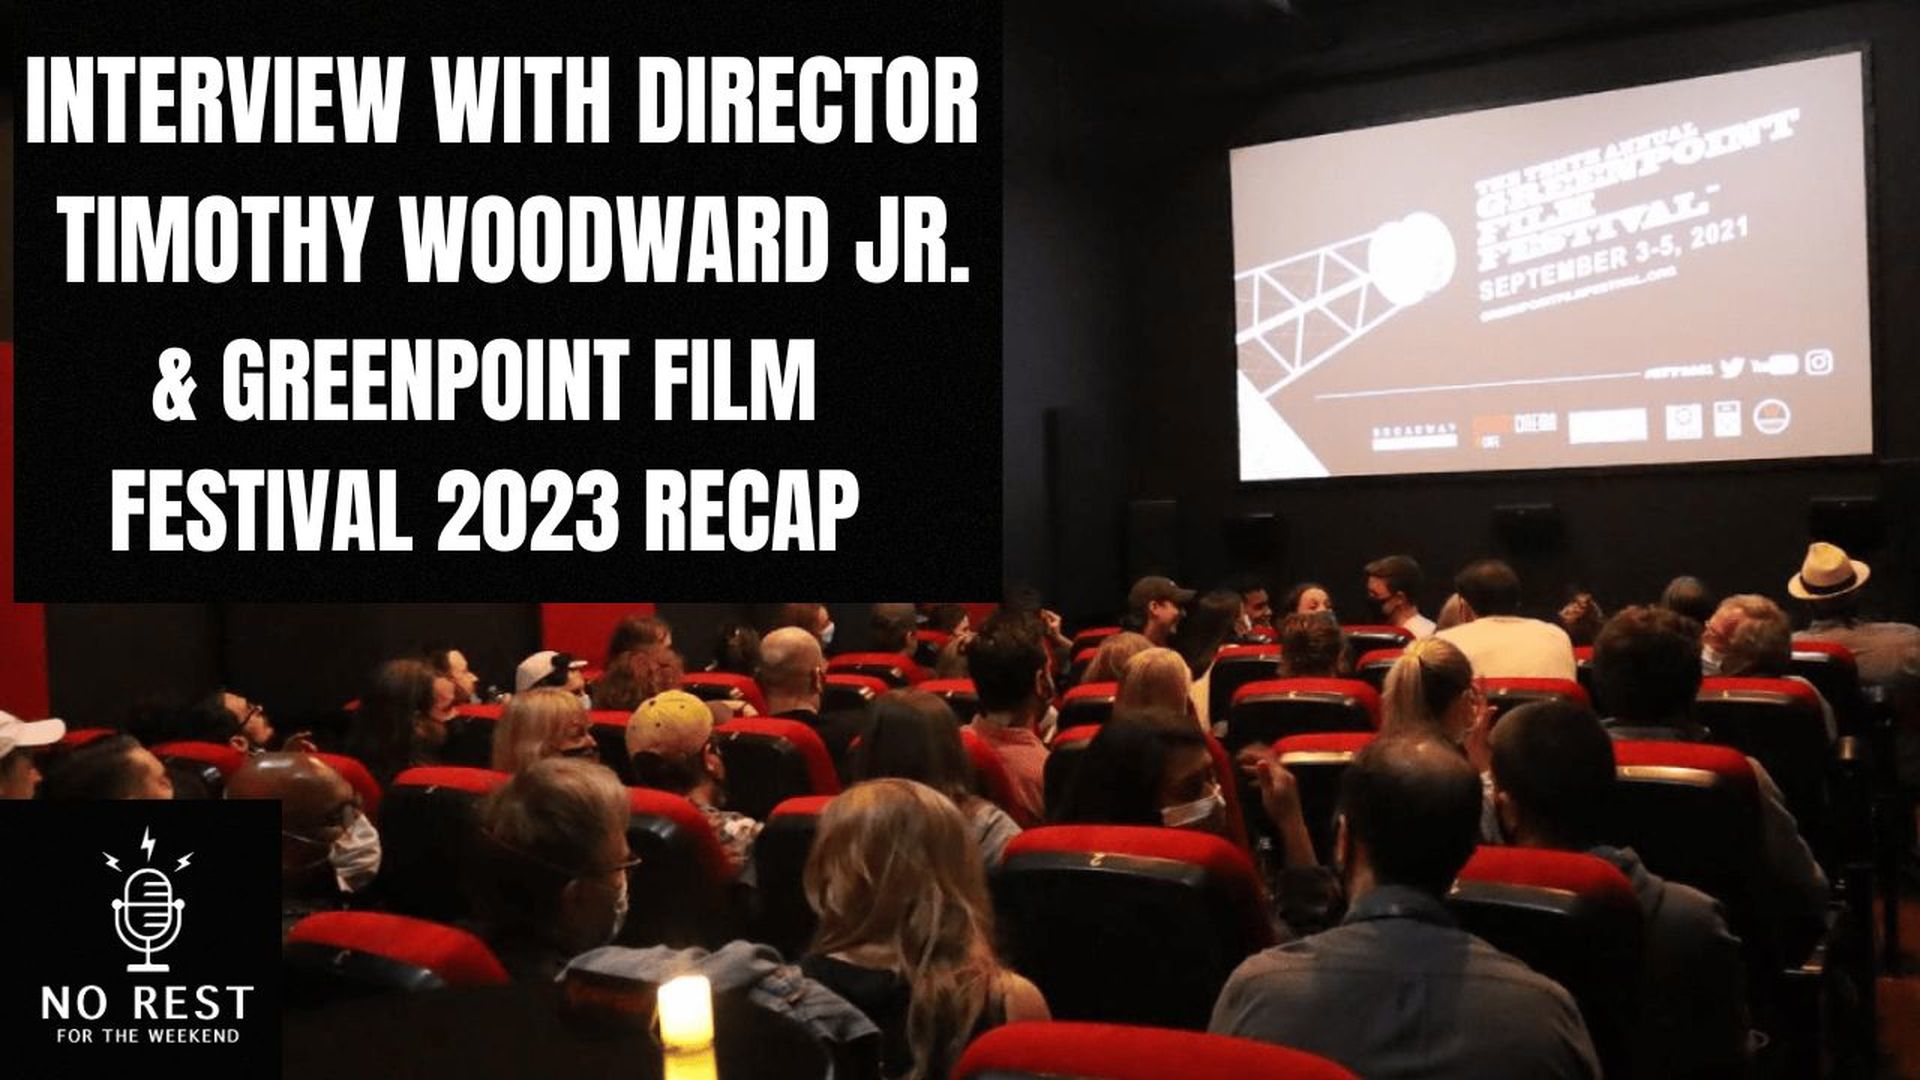 Episode 1401: Timothy Woodward Jr. and Greenpoint Film Festival 2023 Recap